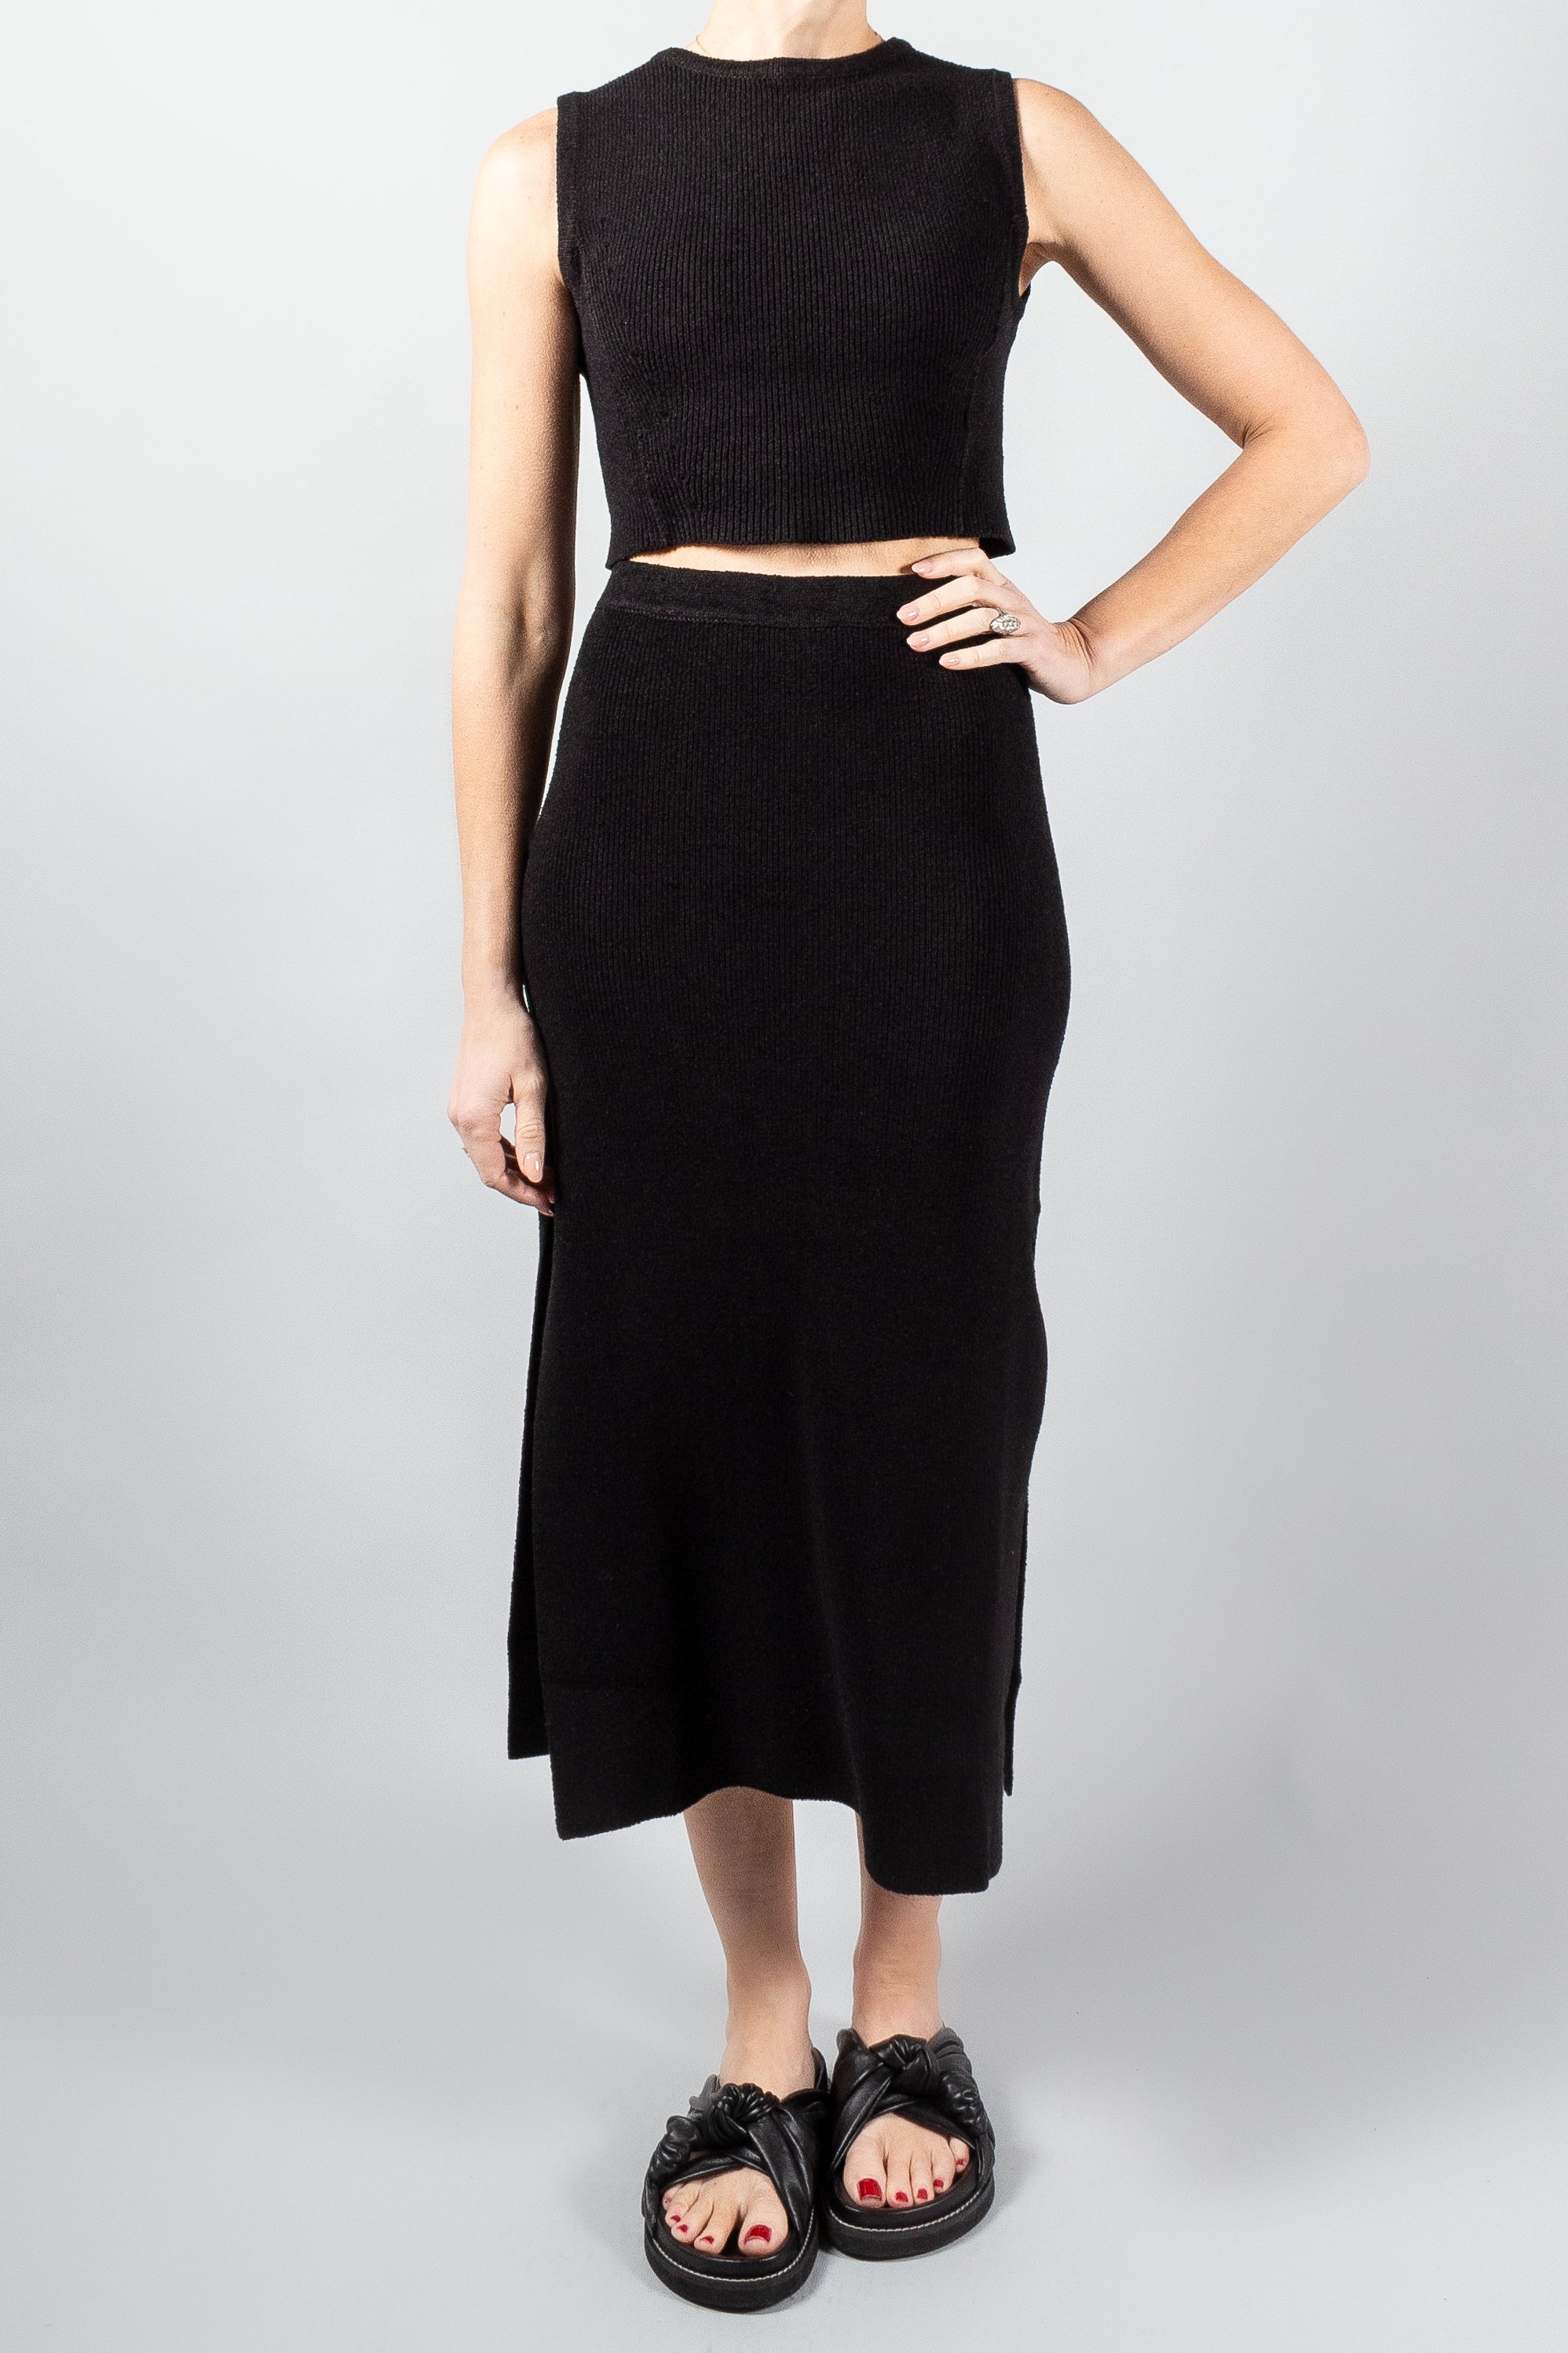 Loulou Studio Aalis Skirt-Skirts-Misch-Boutique-Vancouver-Canada-misch.ca